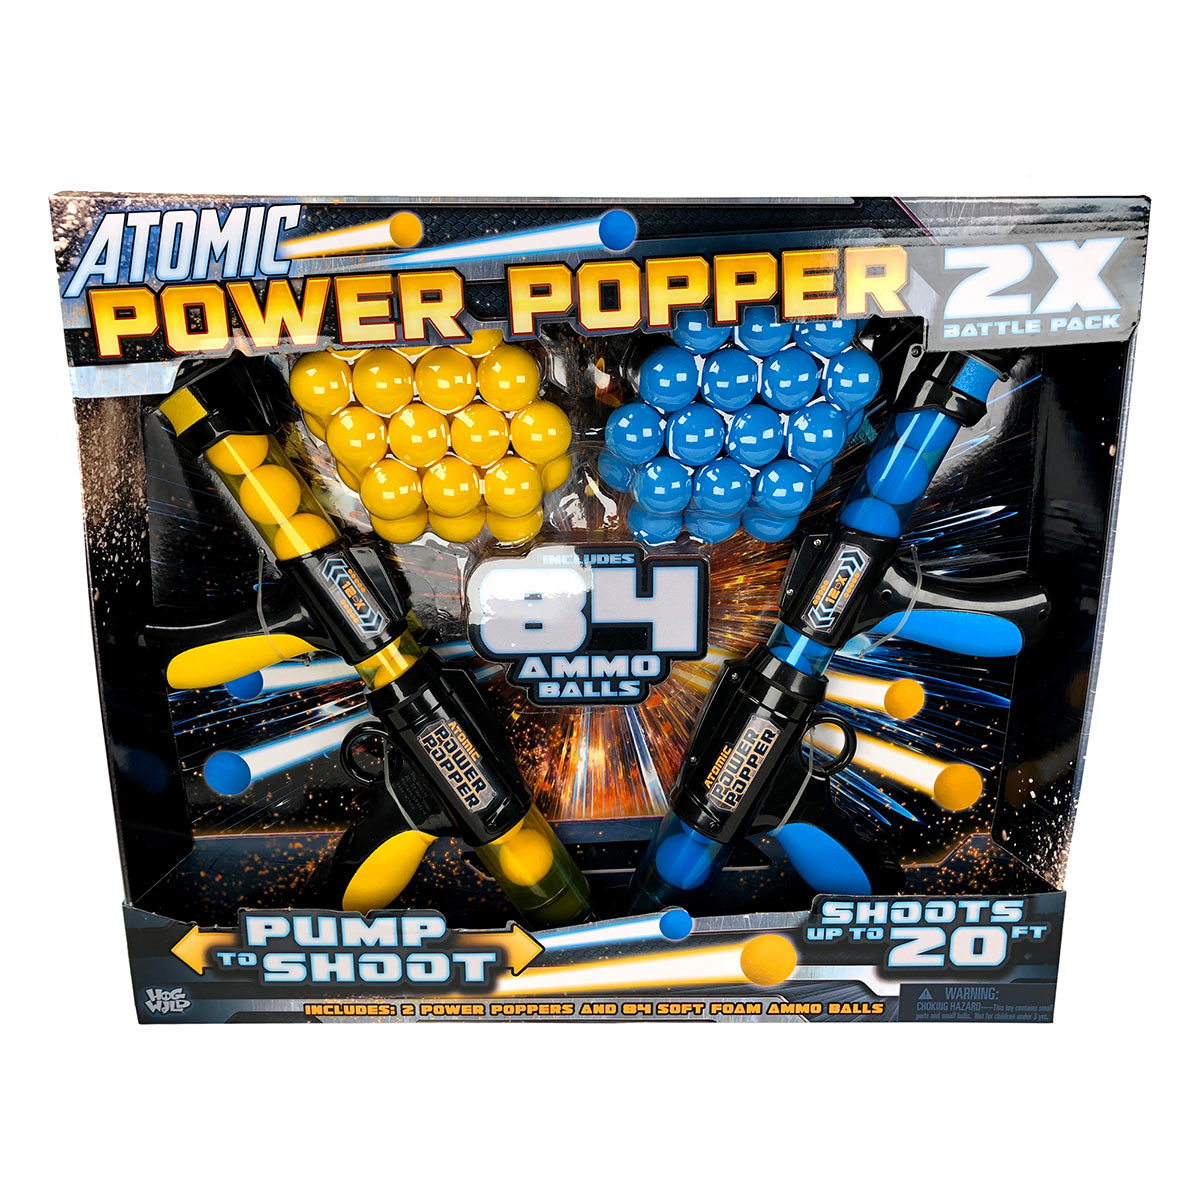 Atomic Power poppers boxed front image